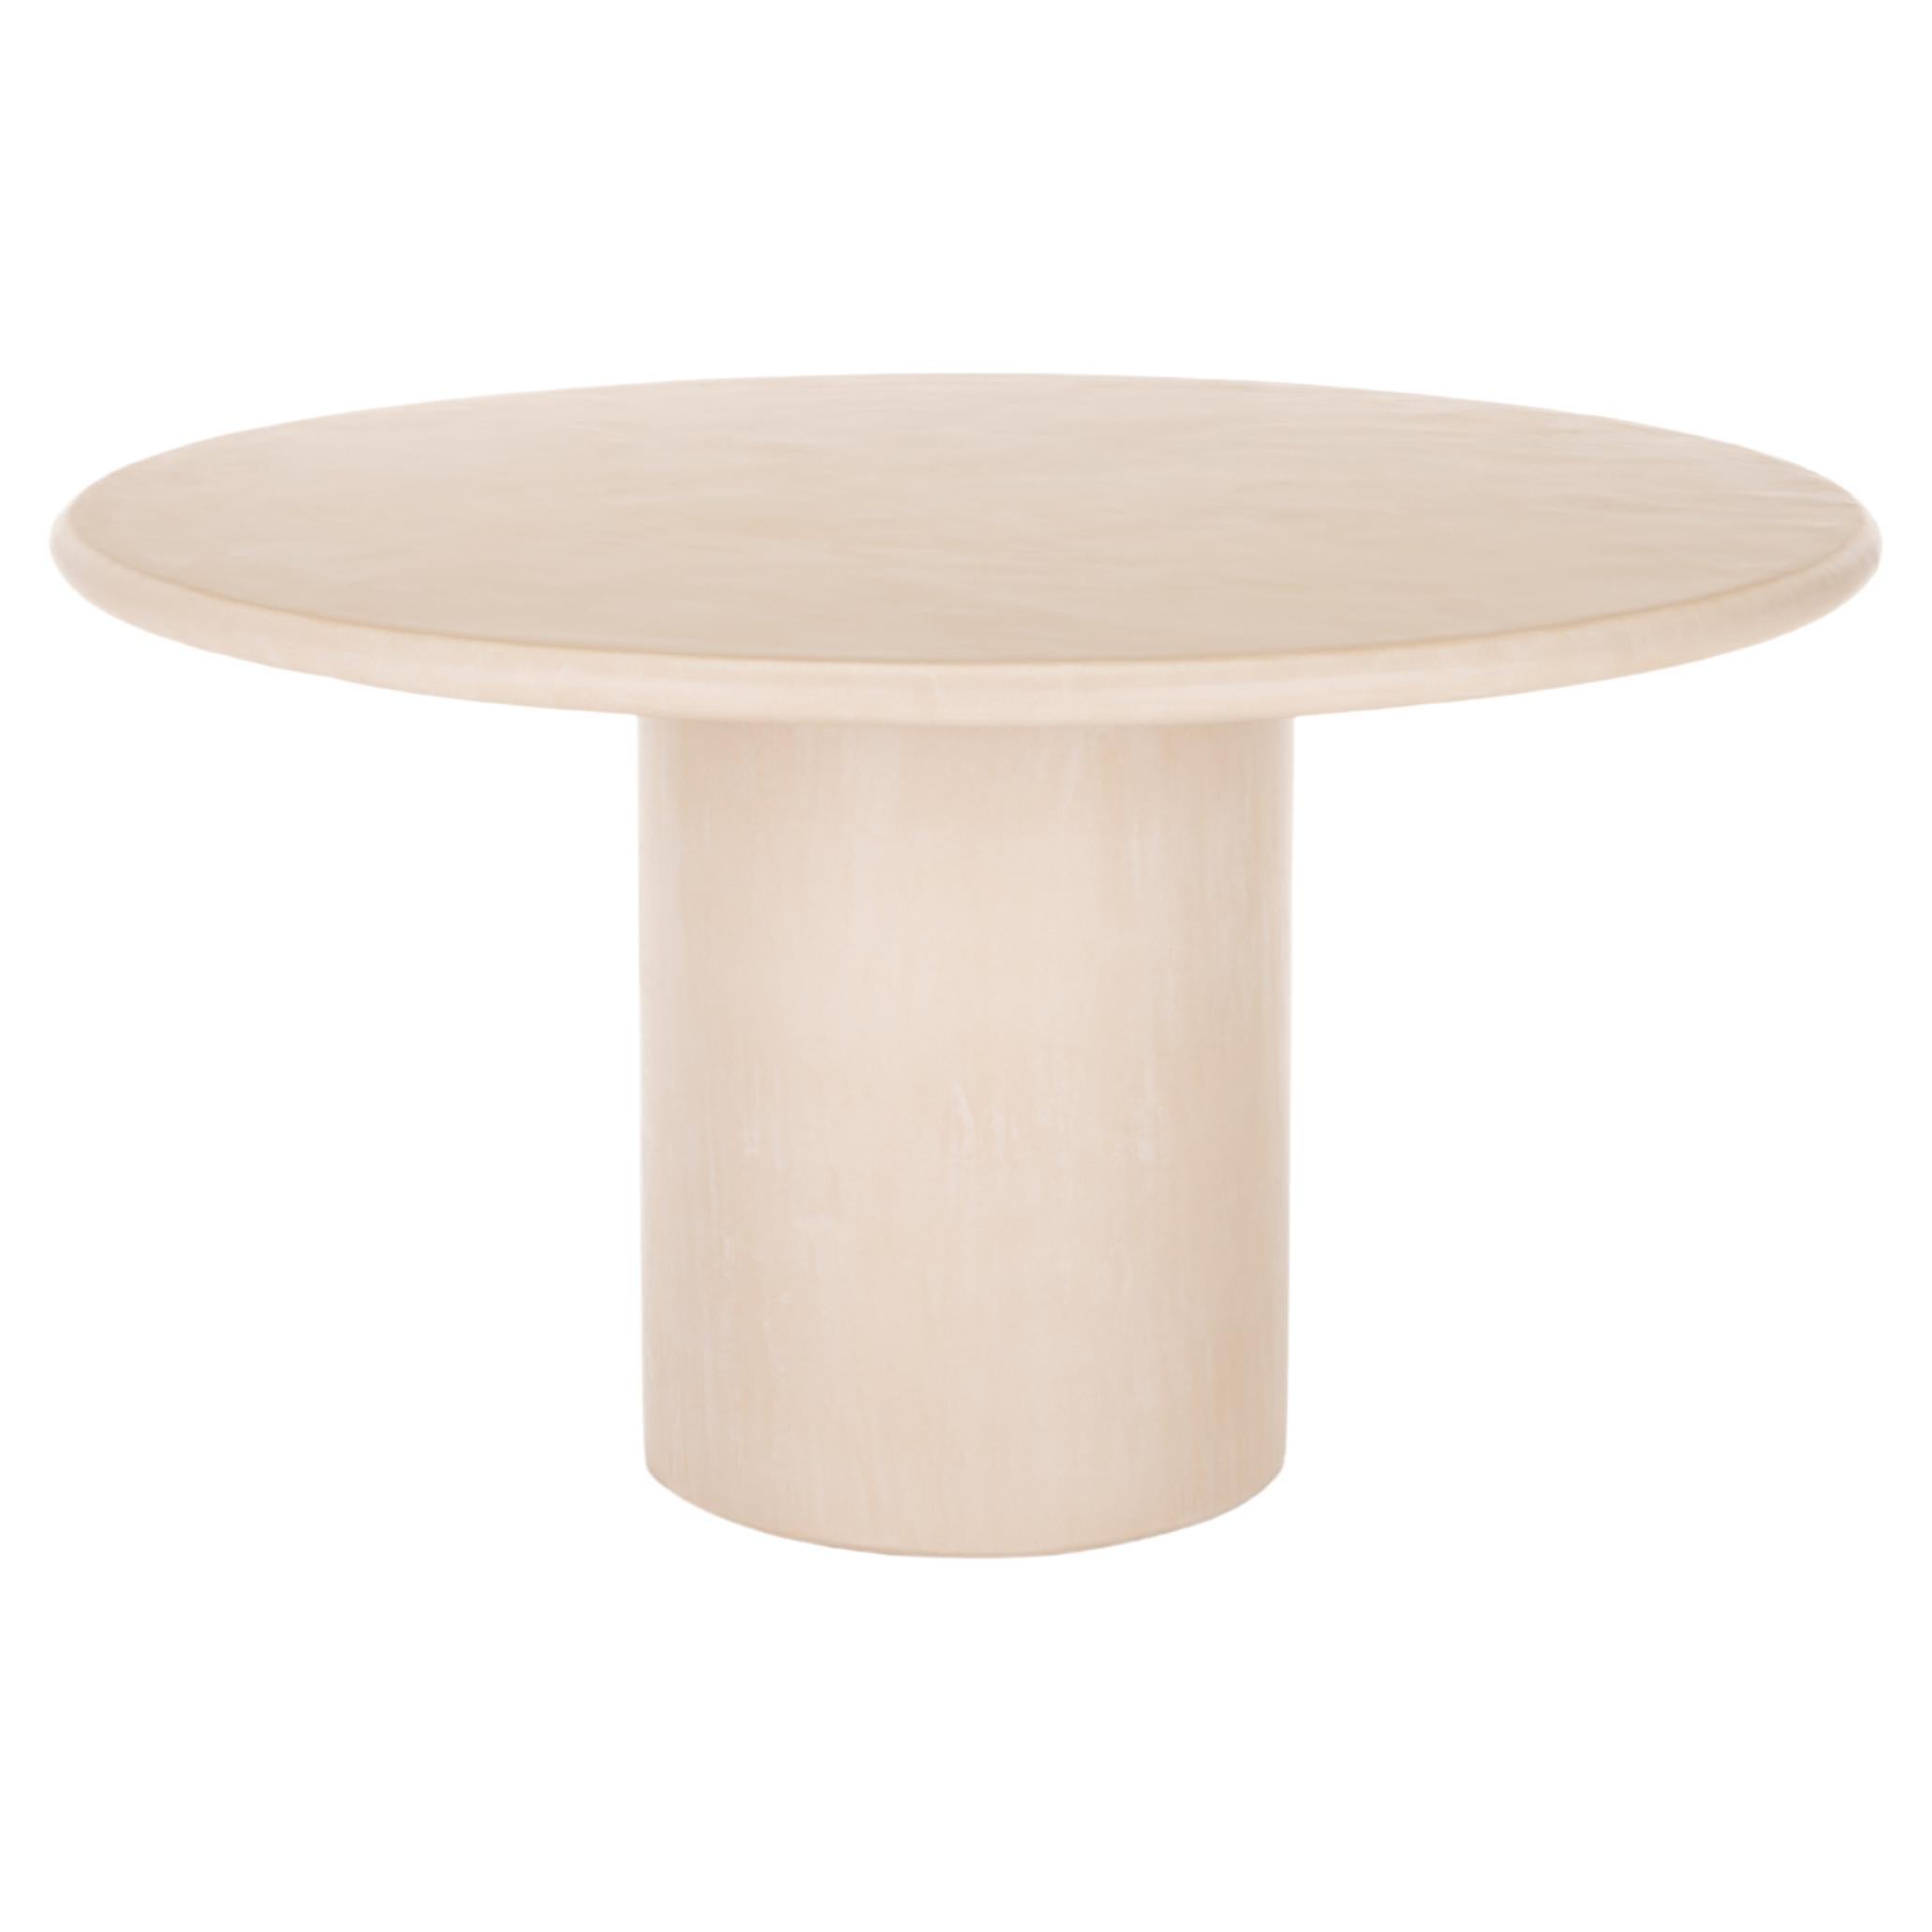 Contemporary Round Natural Plaster "Column" Table 160cm by Isabelle Beaumont For Sale